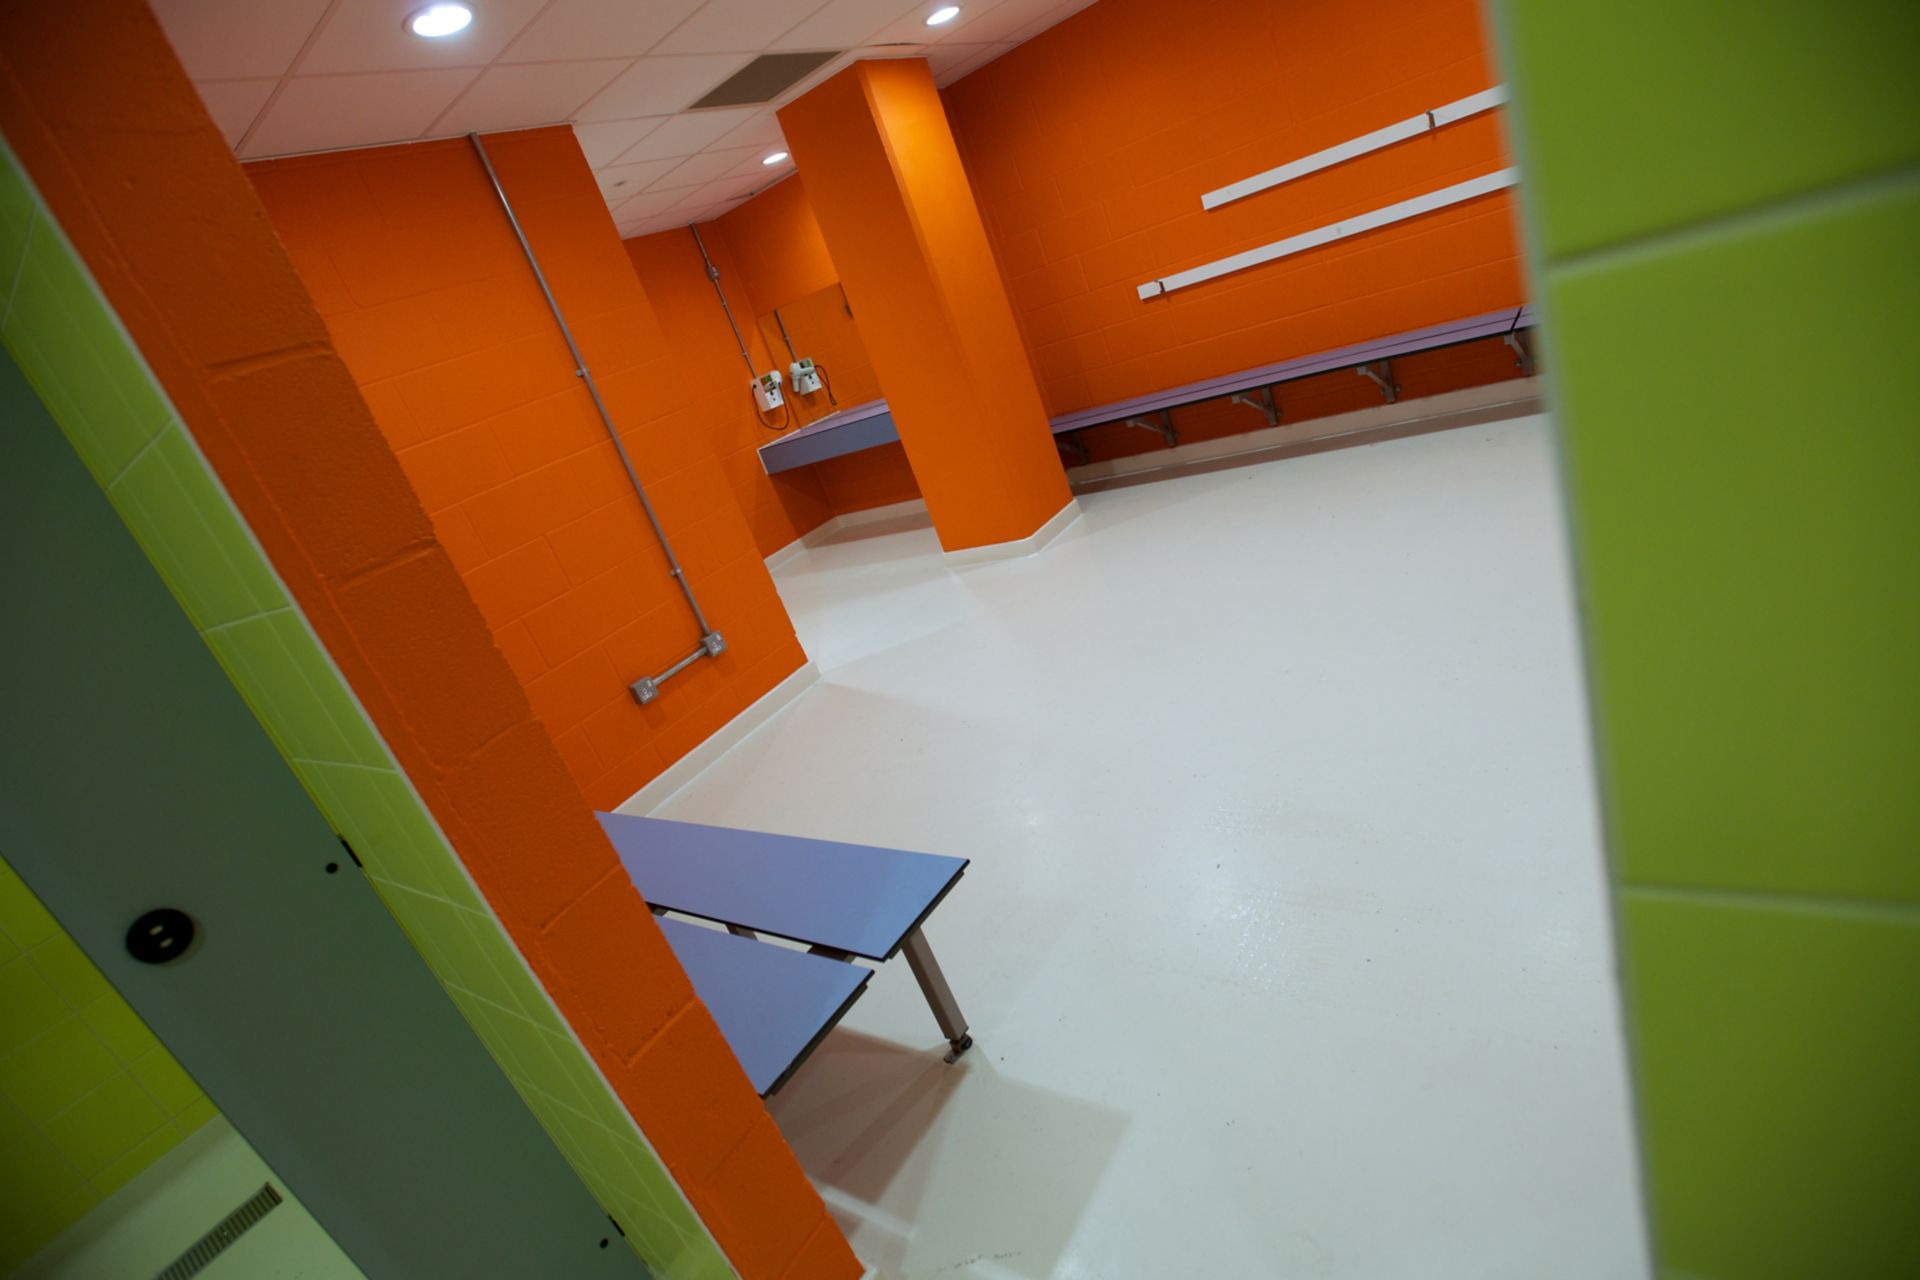 Sika ComfortFloor® white floor with orange and green walls in sport center bathroom changing room